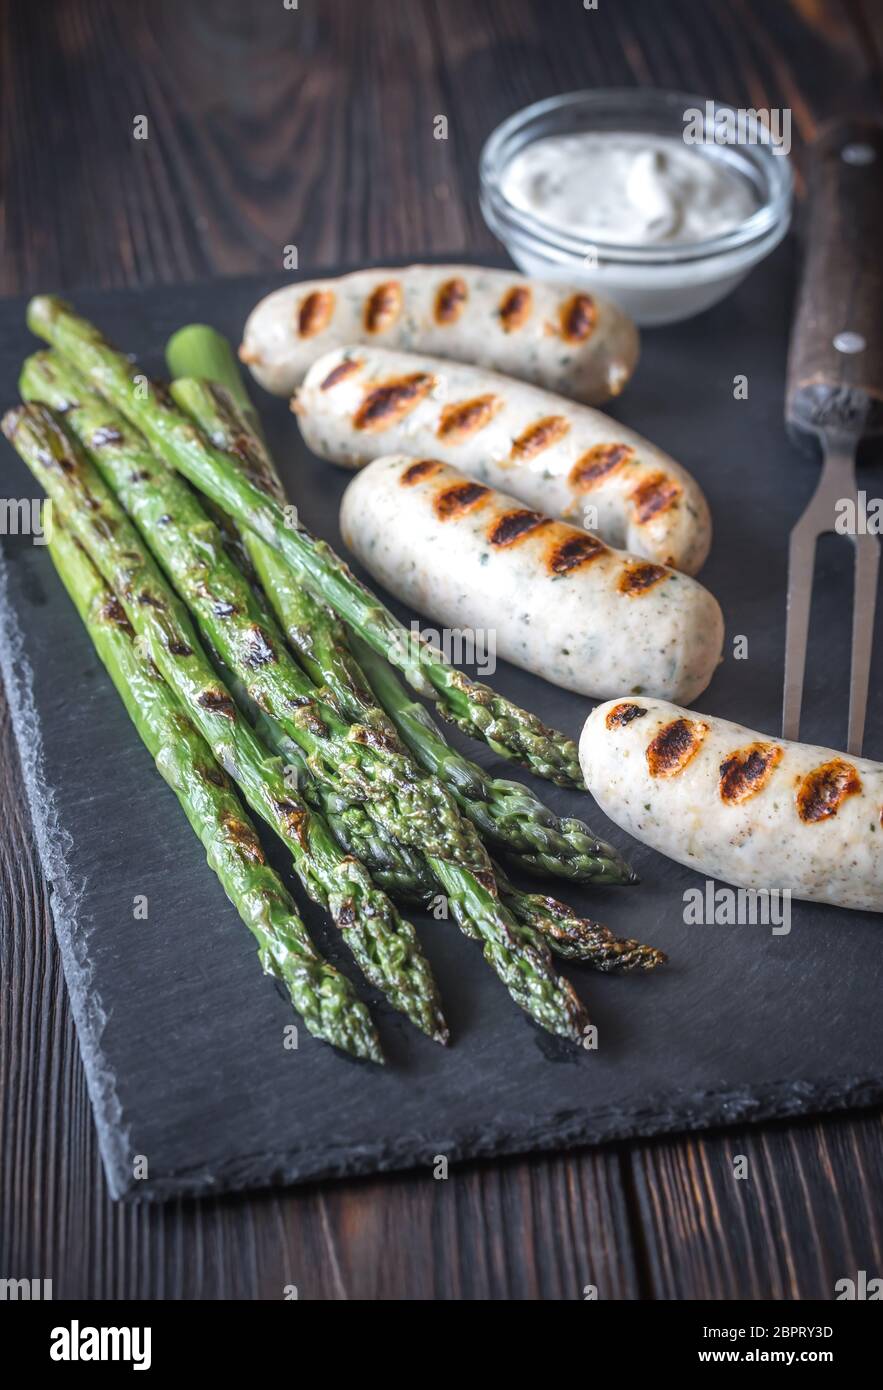 Grilled sausages with asparagus and creamy garlic sauce Stock Photo